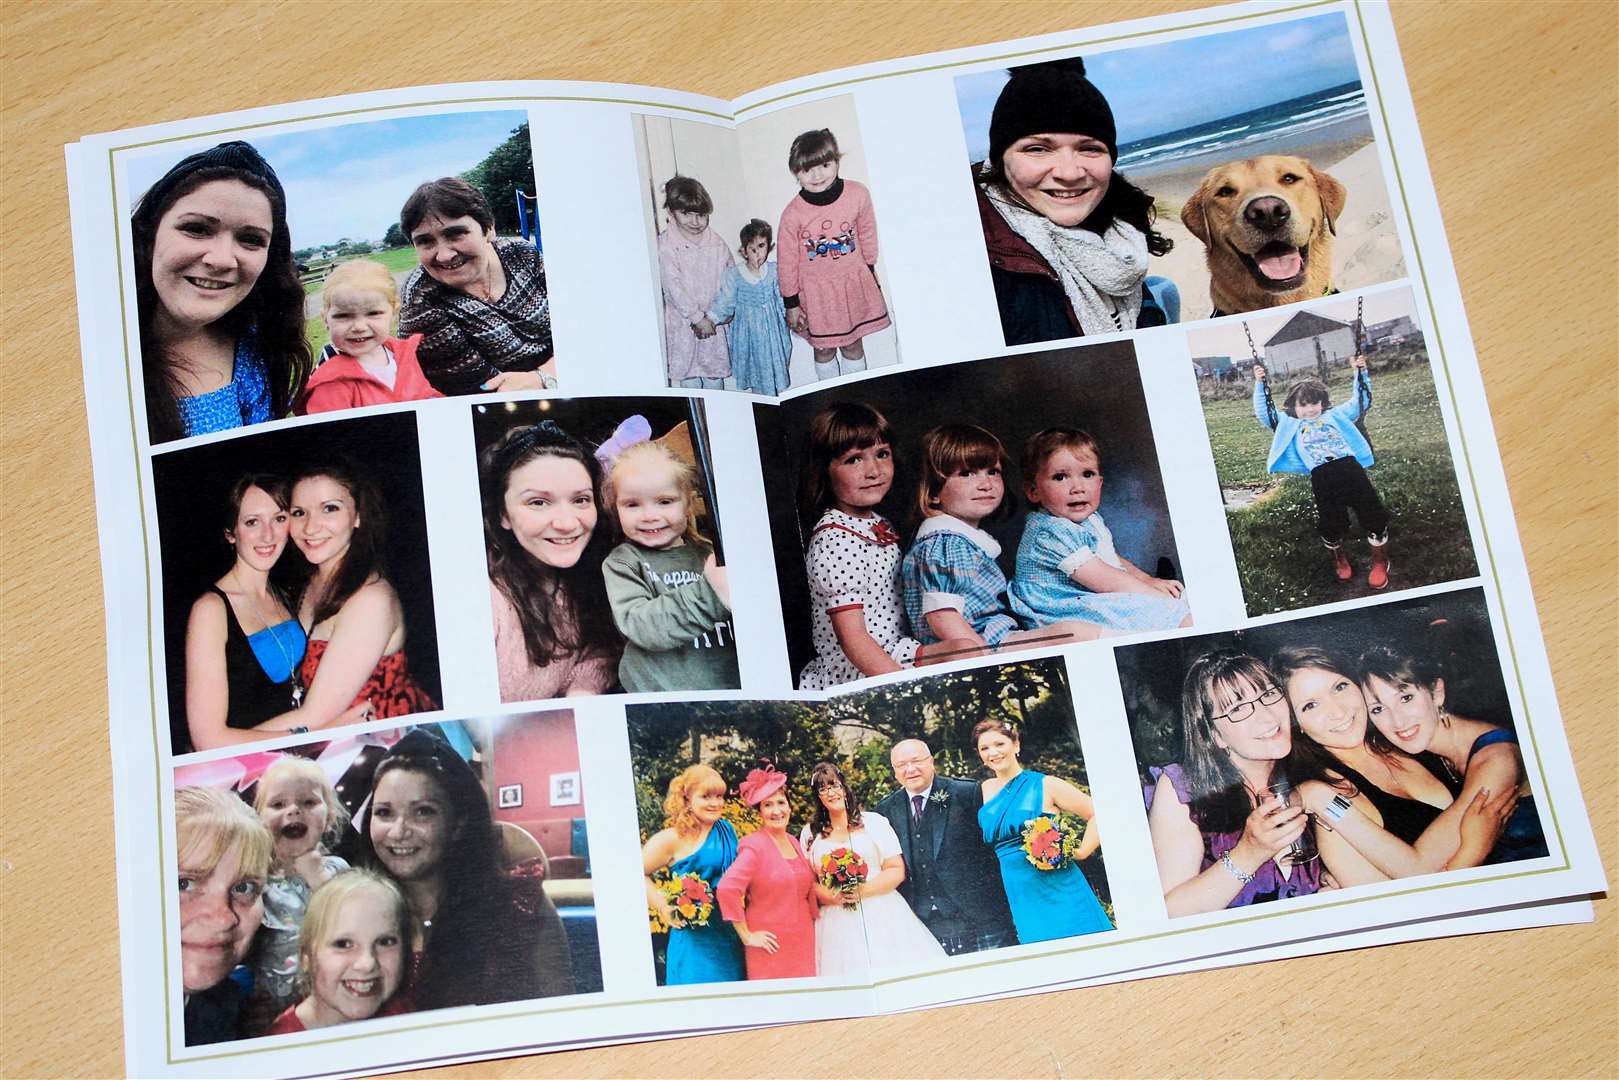 A photo spread from the order of service at the celebration of Marelle's life (published with permission).